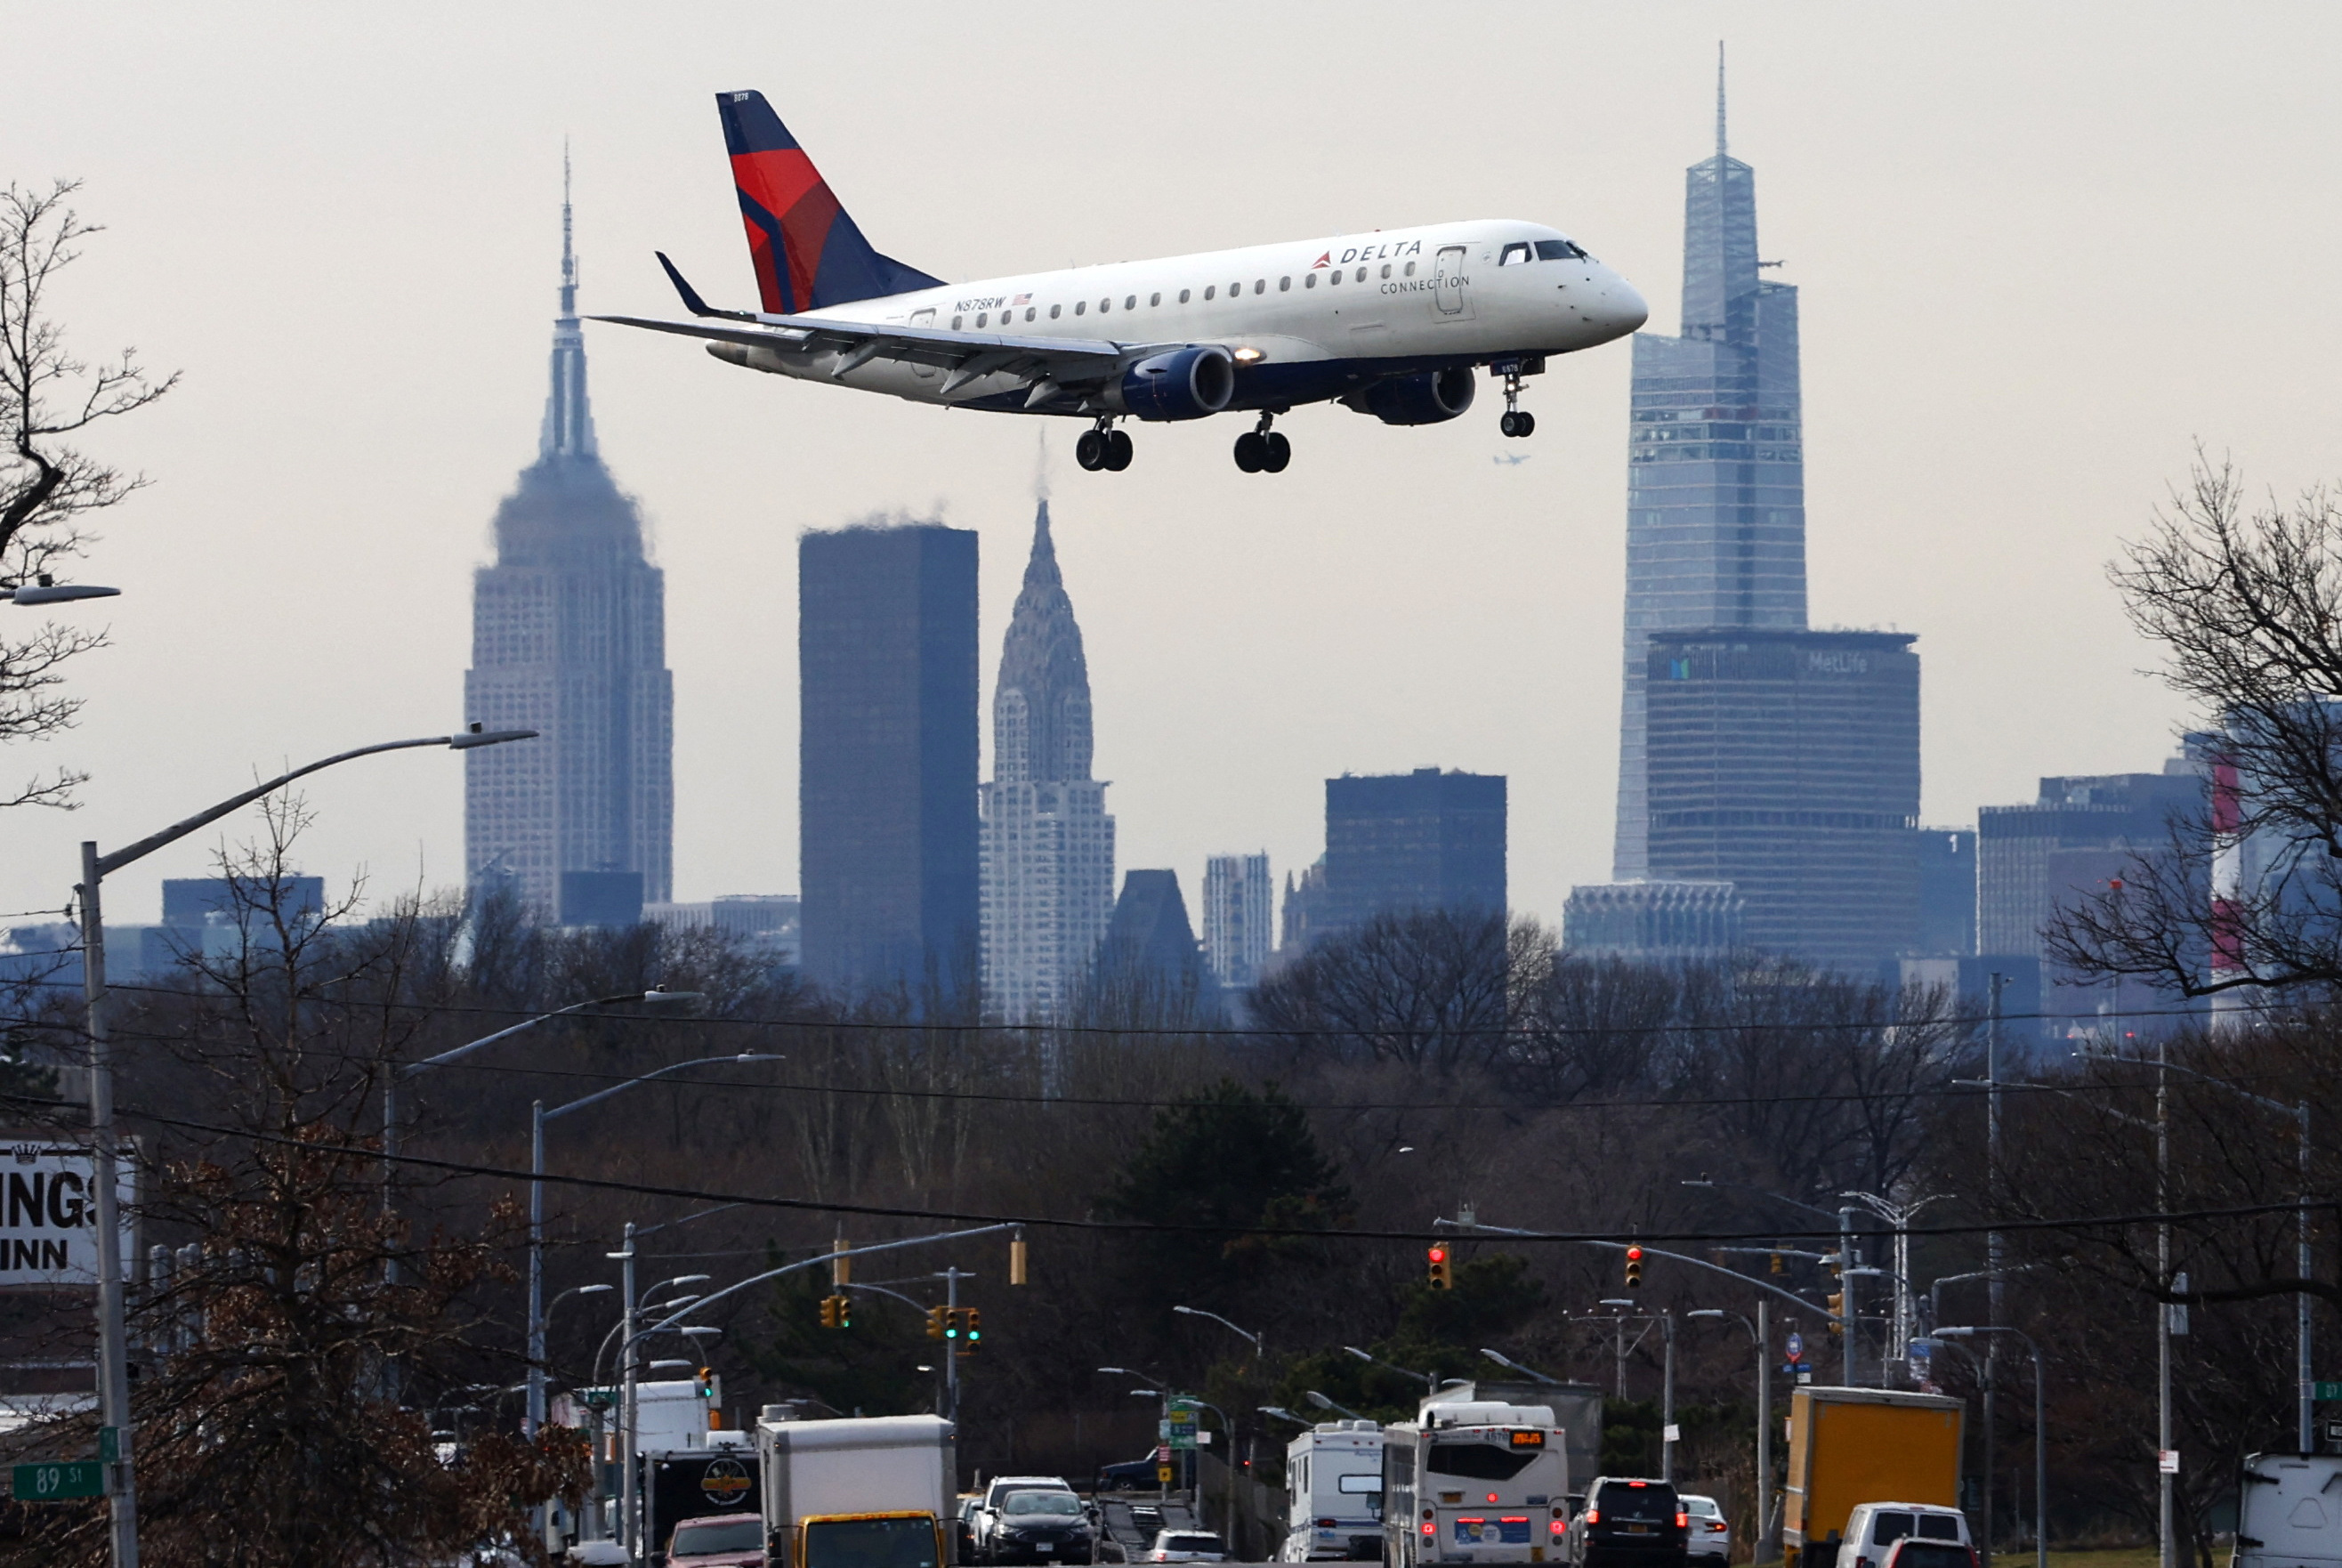 Planes resume flights after FAA system outage at New York's LaGuardia Airport